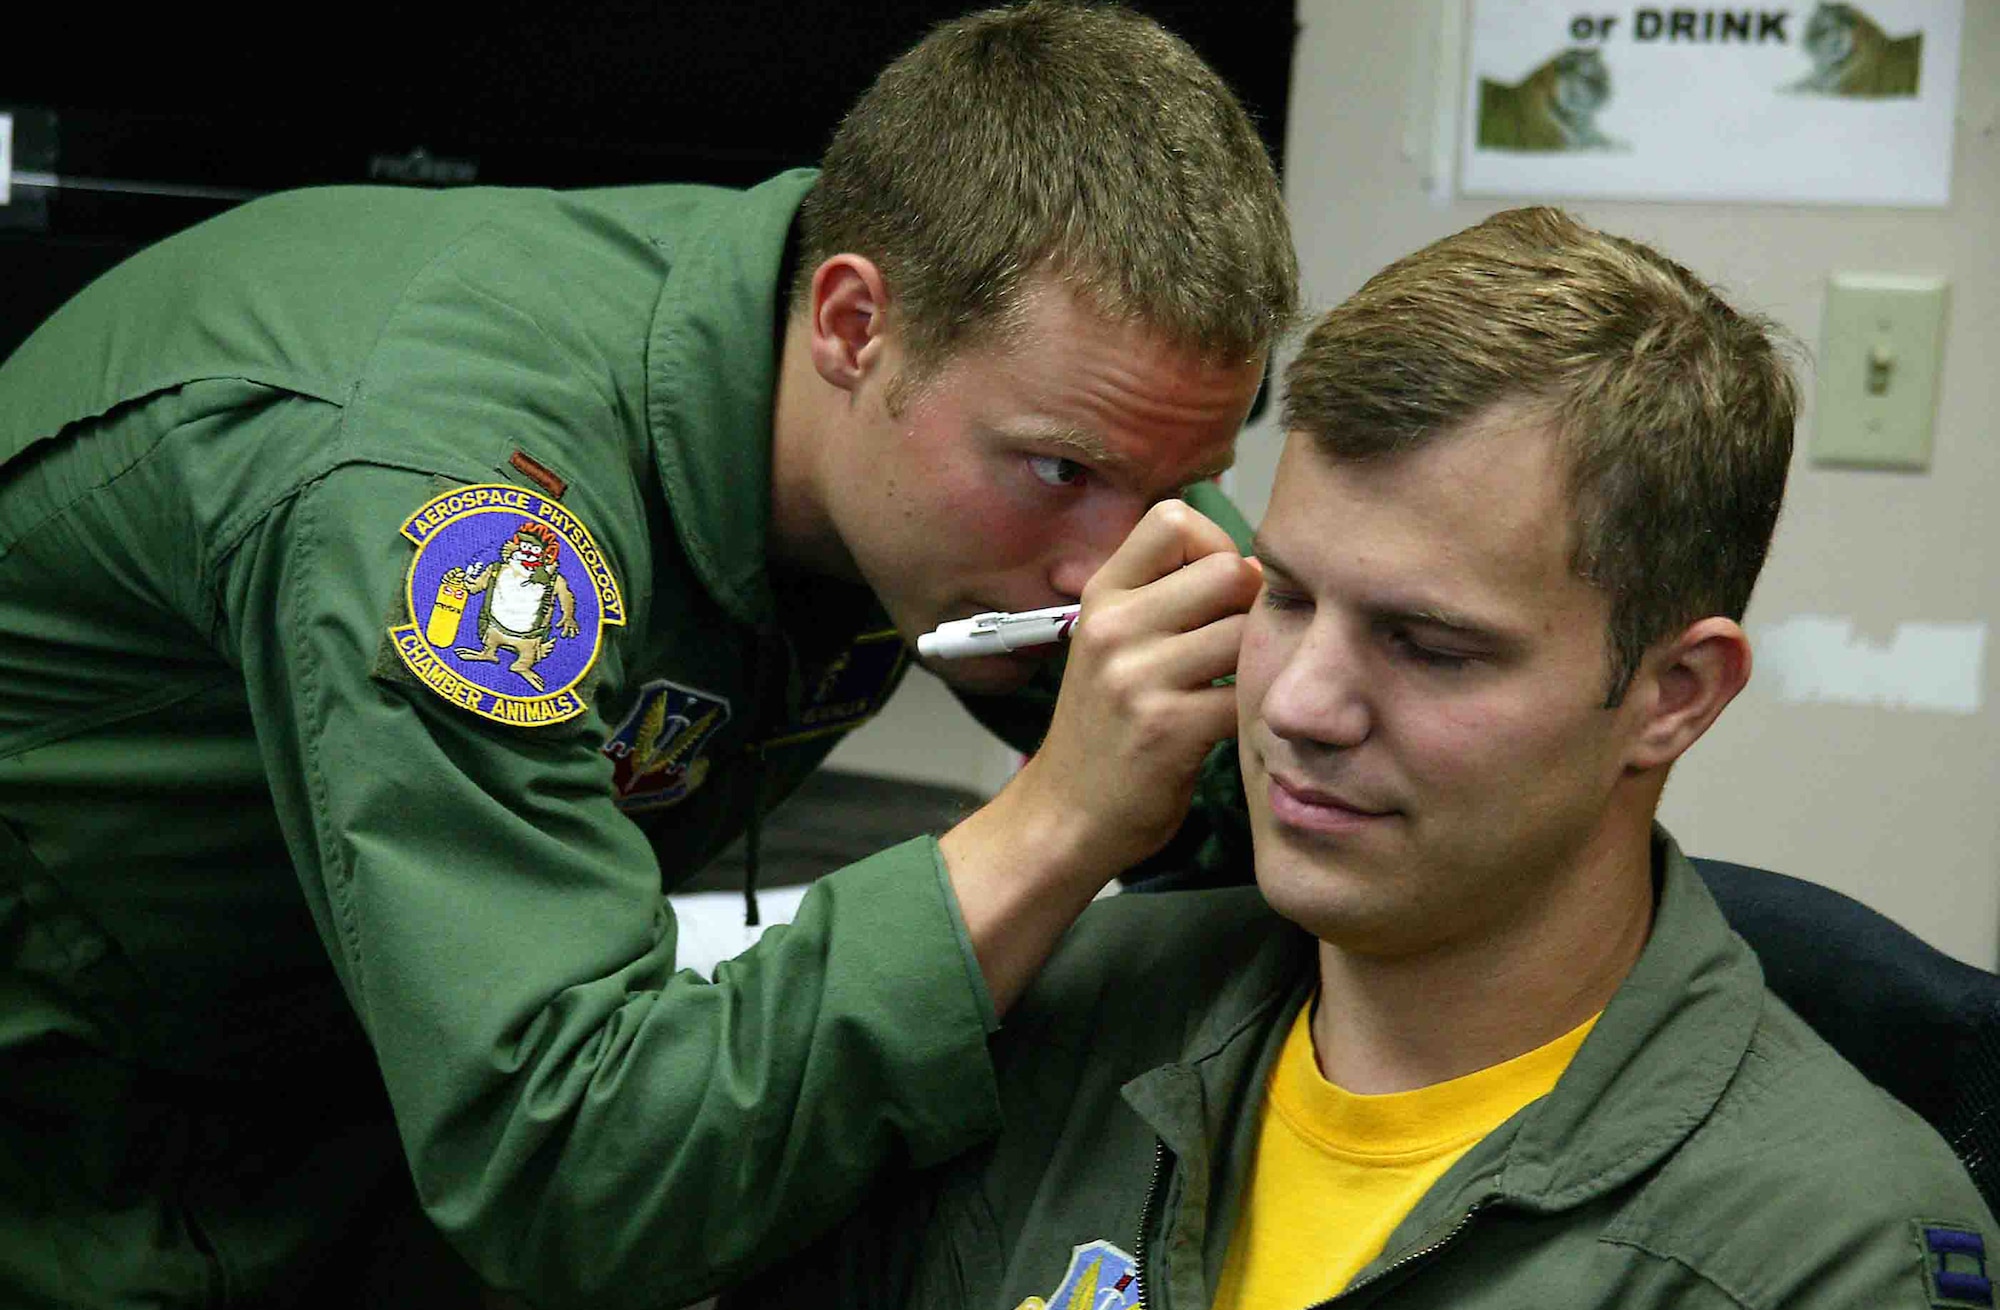 2nd Lt. Chris Reichlen (left) inserts a tube into the ear of Capt. Joe Biedenbach to make an inner-ear mold for the Attenuating Custom Communications Earpiece System Sept. 14 at Shaw Air Force Base, S.C. The ACCES device will significantly reduce surrounding ambient noise that pilots hear in the cockpit and increase the efficiency of radio communications. Lieutenant Reichlen is a 20th Aerospace Medicine Squadron aerospace physiologist, and Captain Hand is a 79th Fighter Squadron F-16 Fighting Falcon pilot. (U.S. Air Force photo/Senior Airman John Gordinier) 
